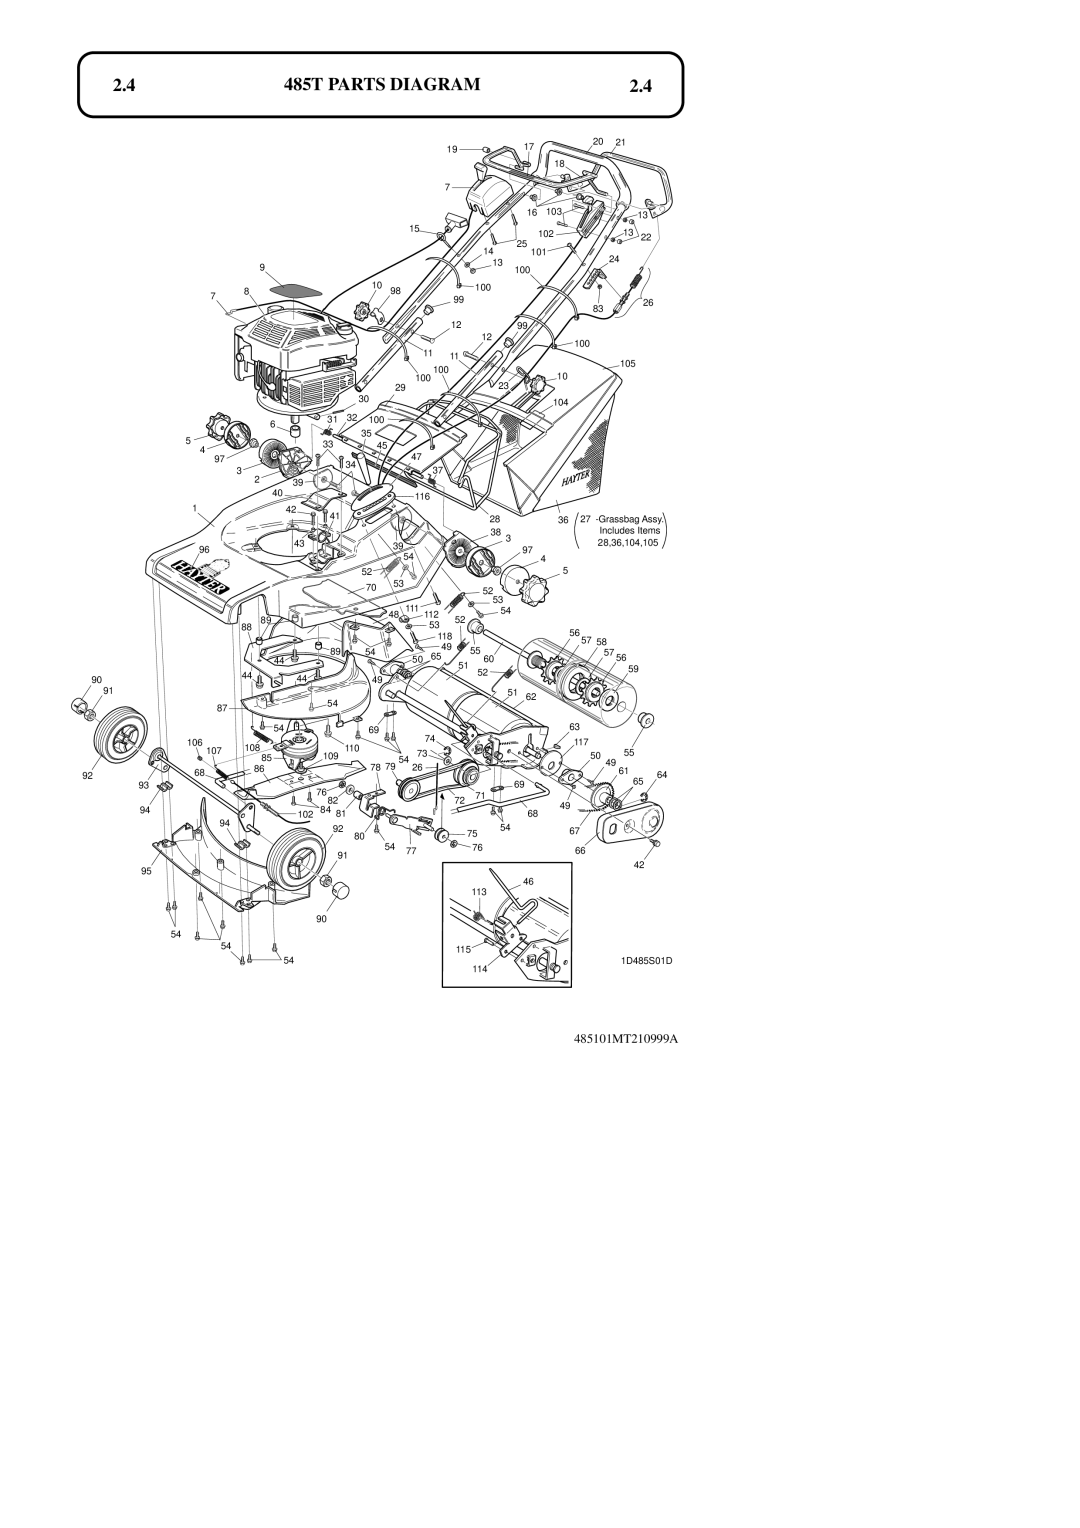 Hayter Mowers 48ST manual 485T PARTS DIAGRAM, 485101MT210999A 